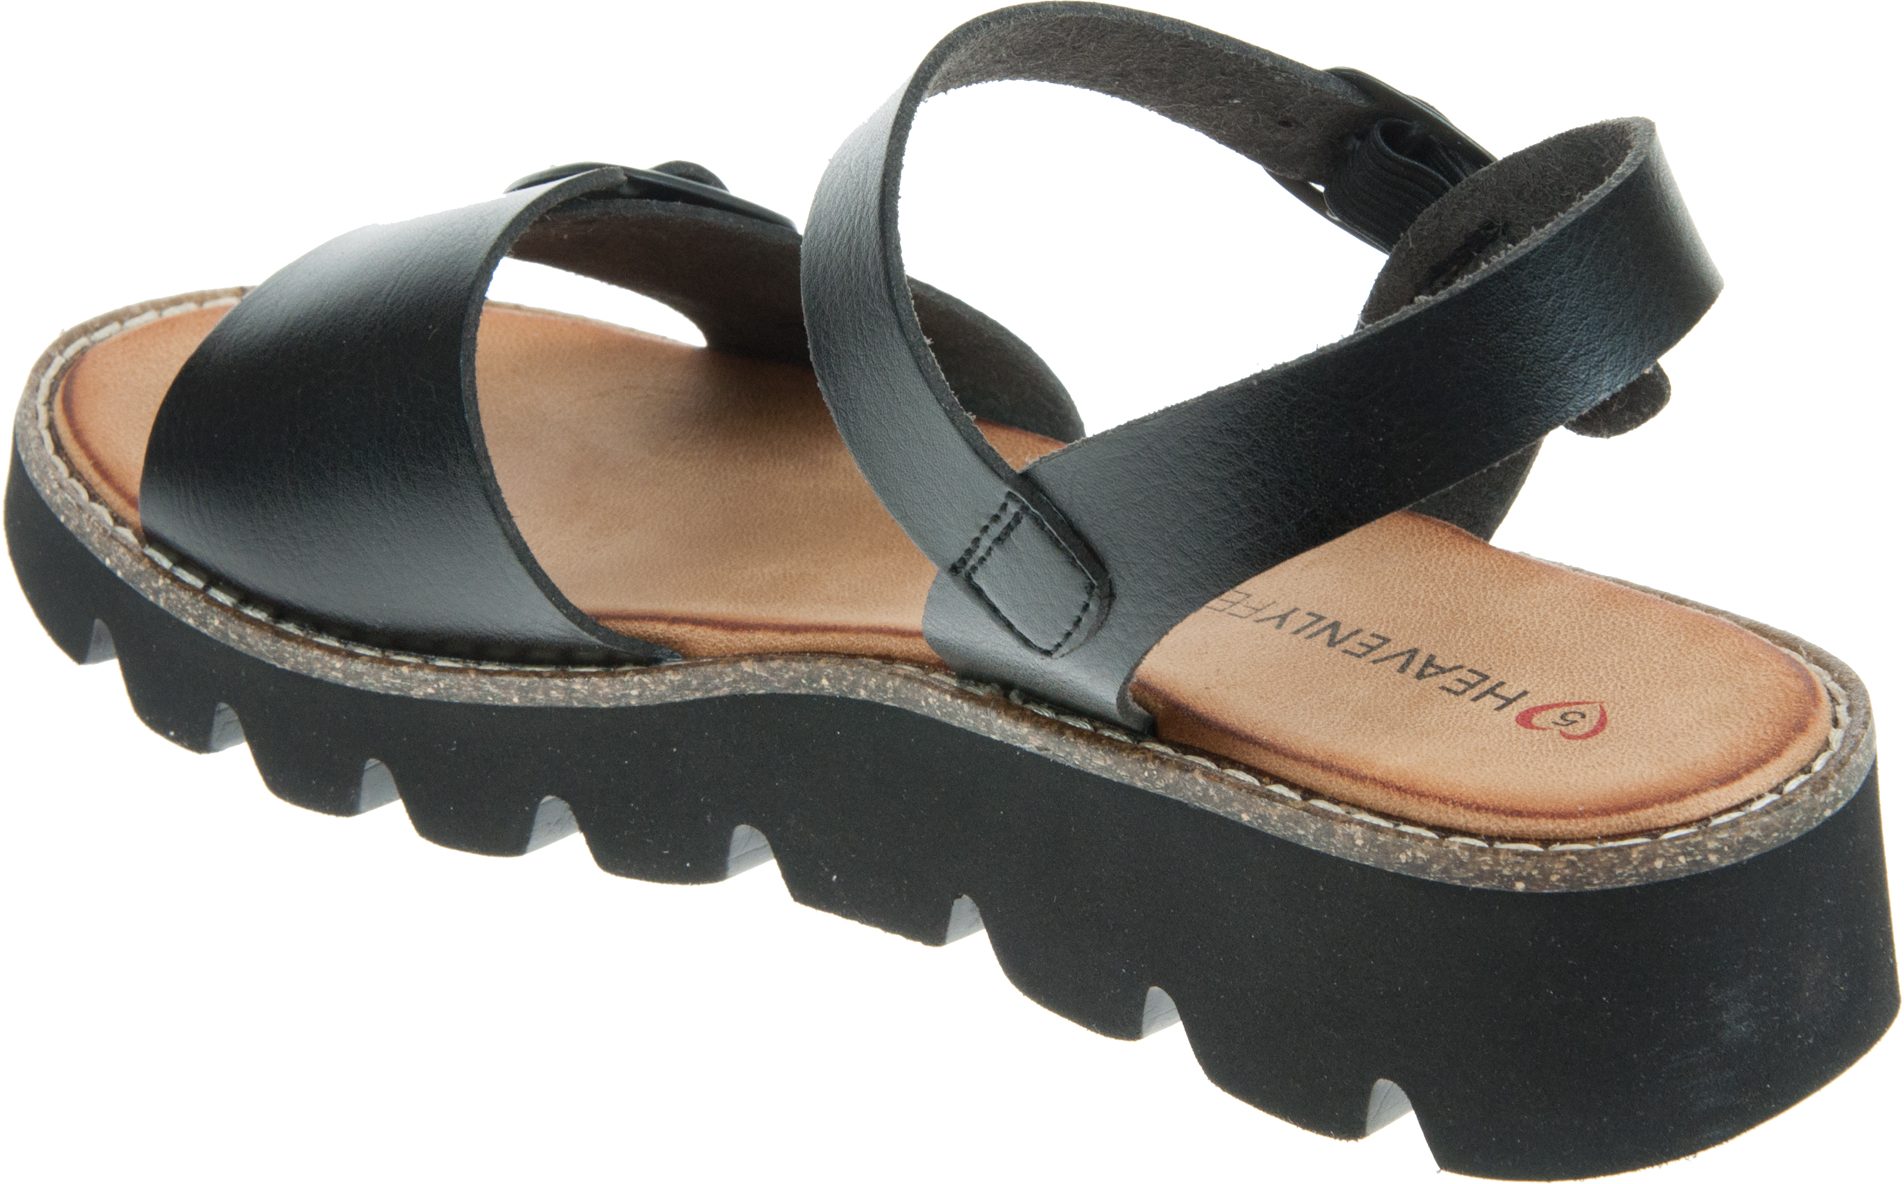 Heavenly Feet Trudy Black Sm0003269 - Full Sandals - Humphries Shoes